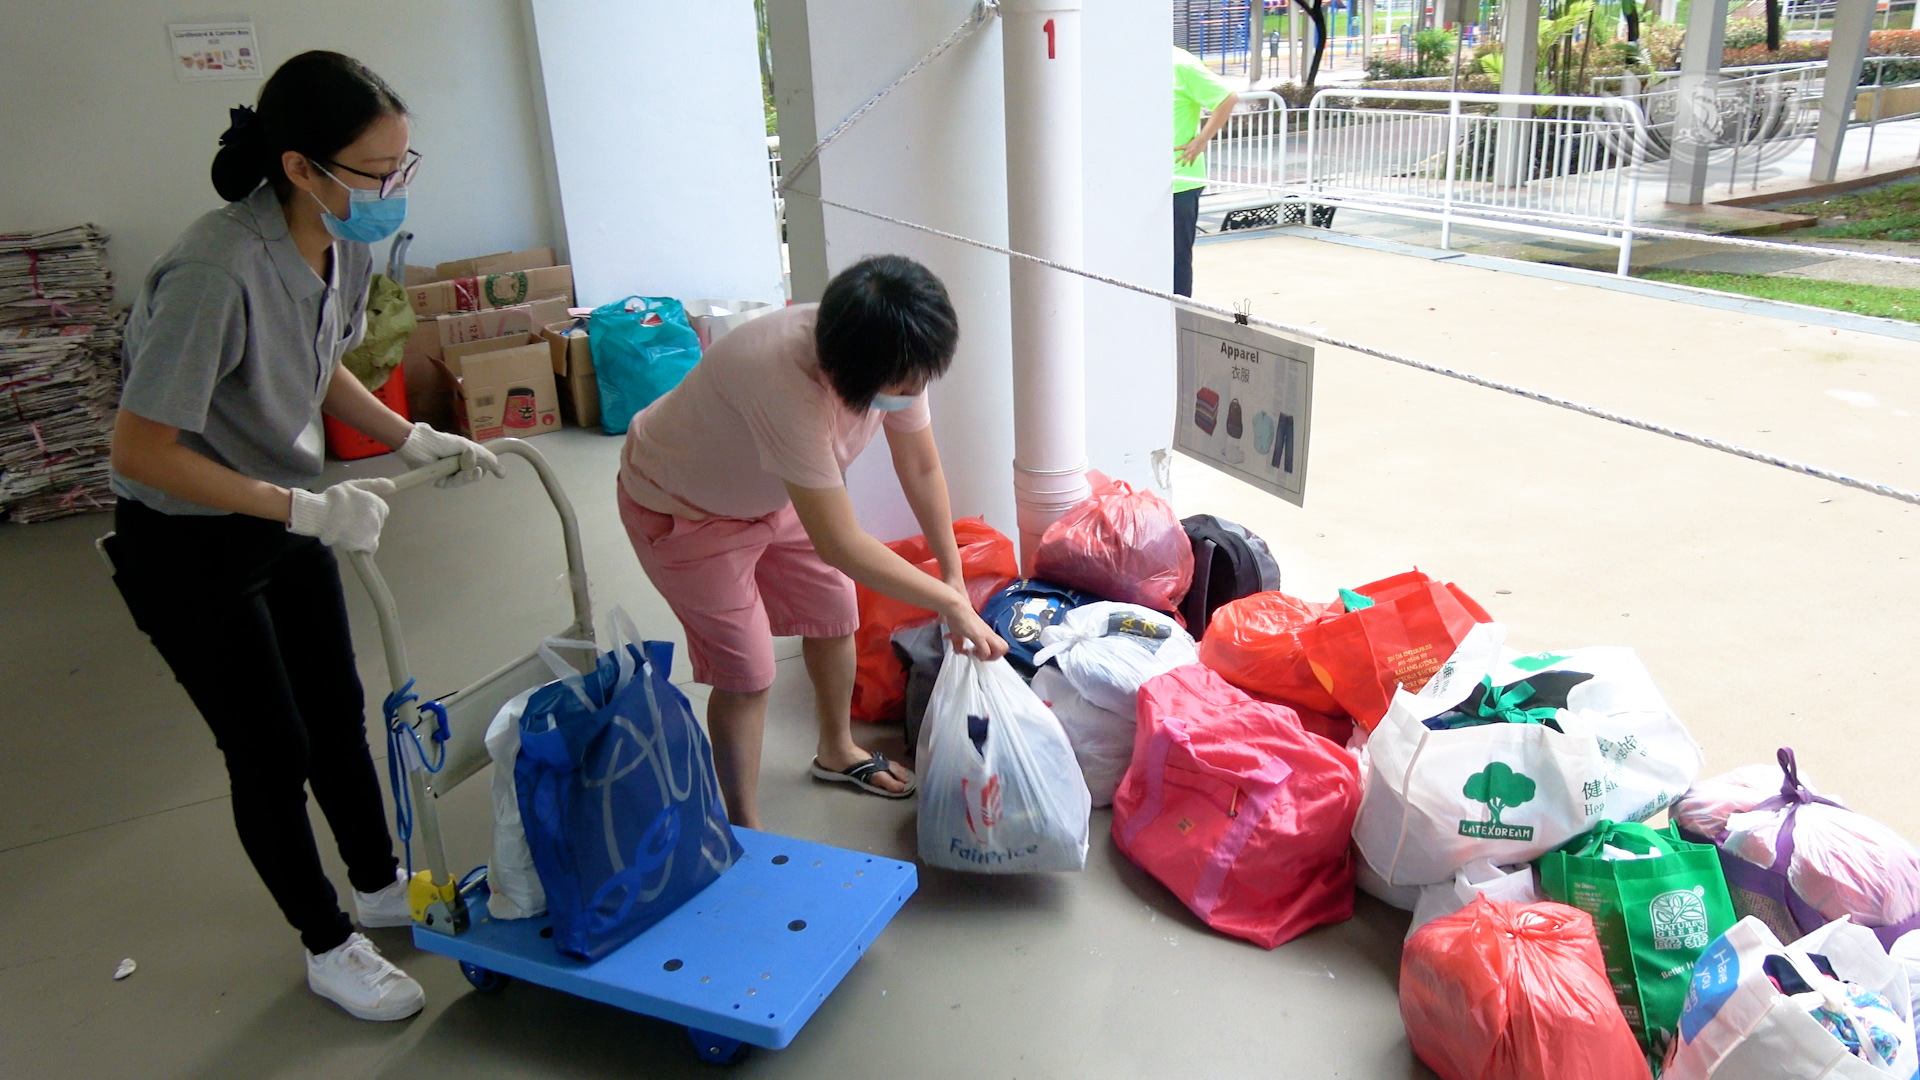 Tzu Chi’s revamped monthly eco activity is now back in action